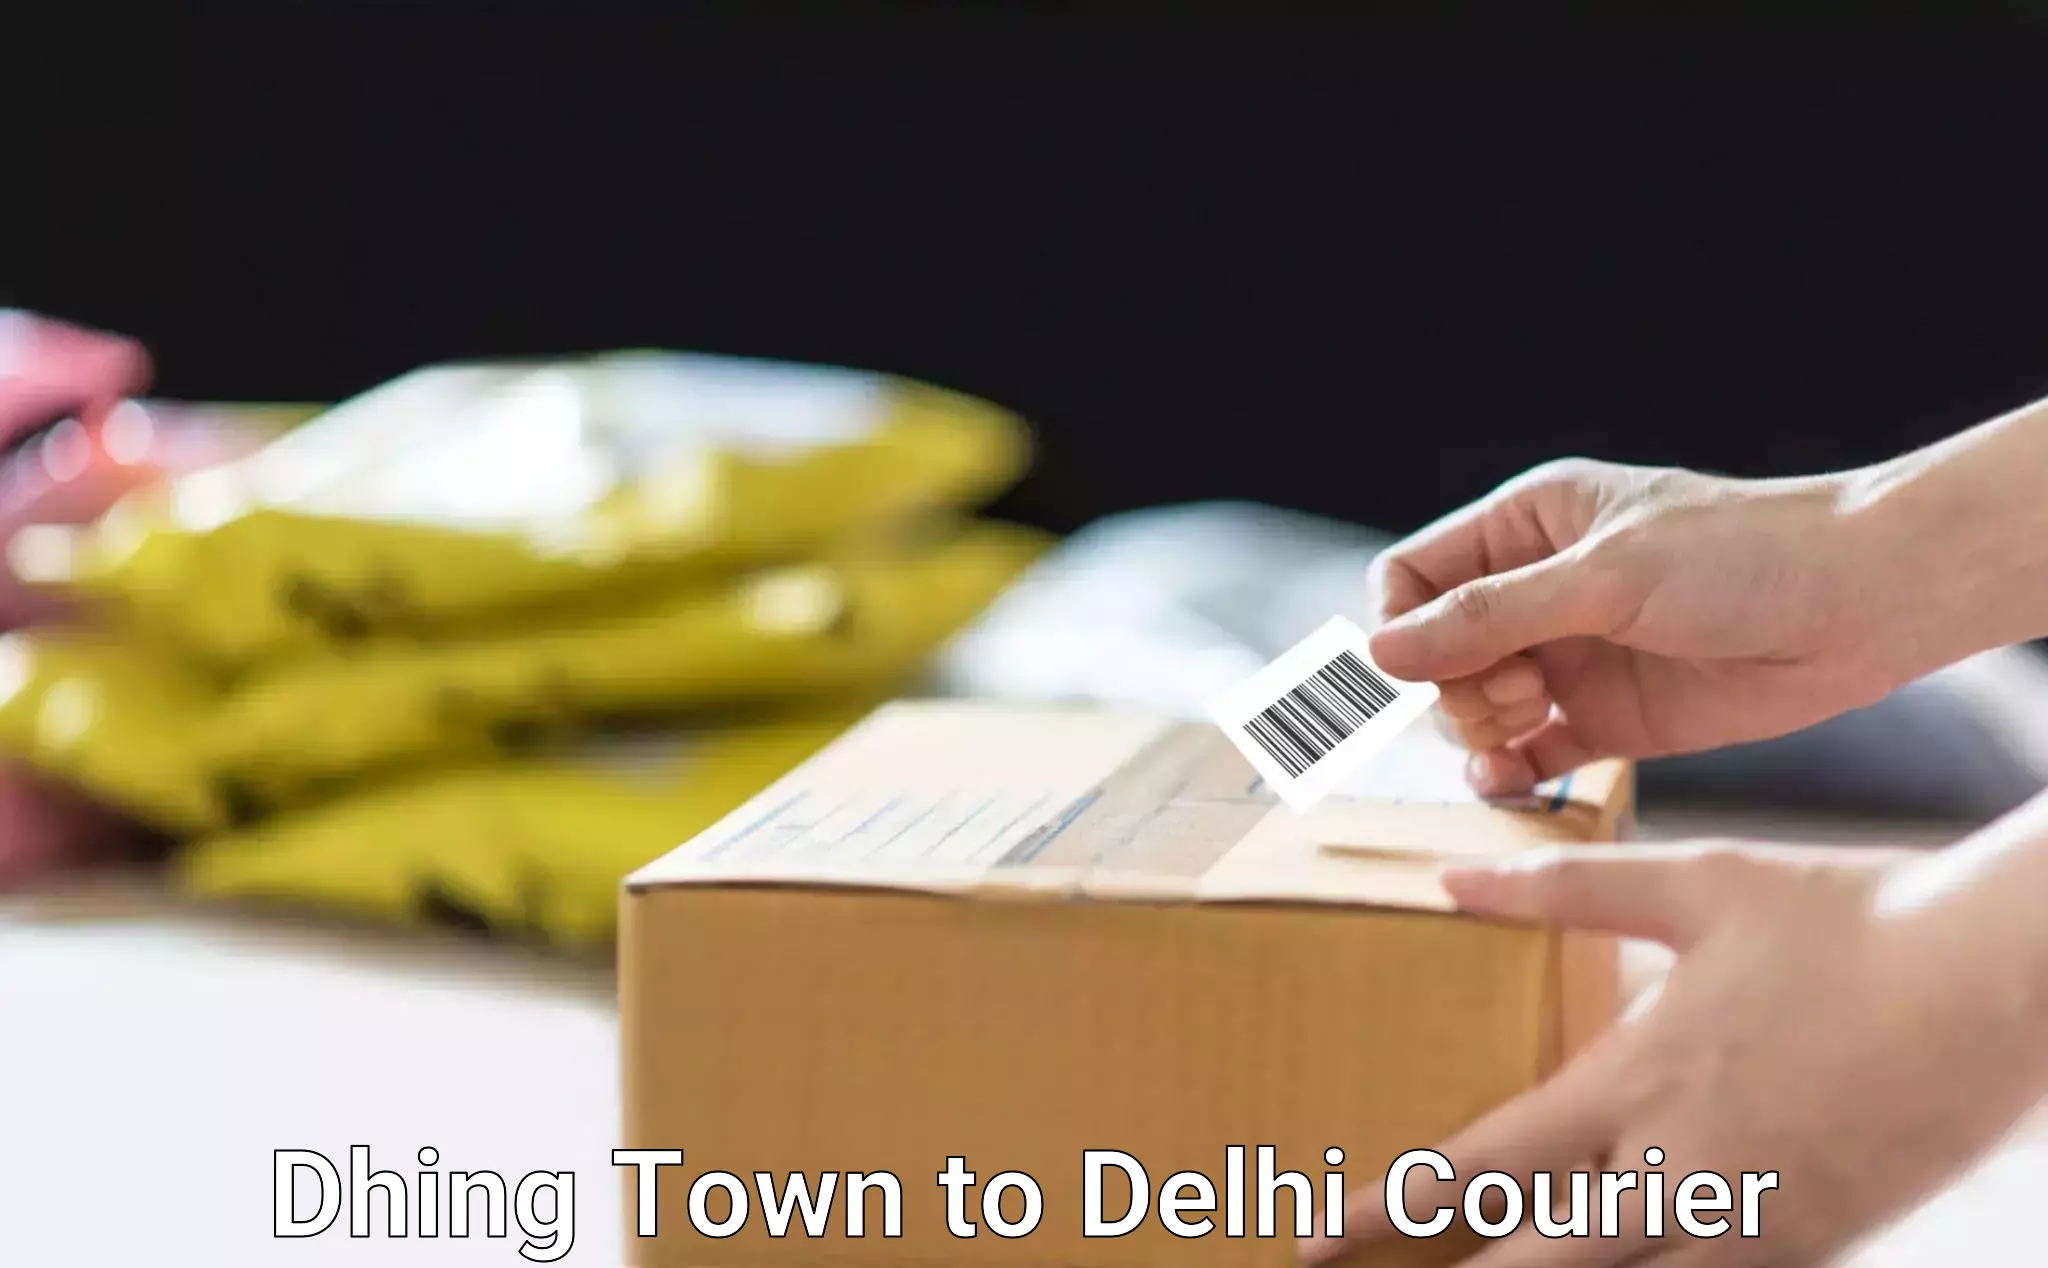 Courier service innovation Dhing Town to Delhi